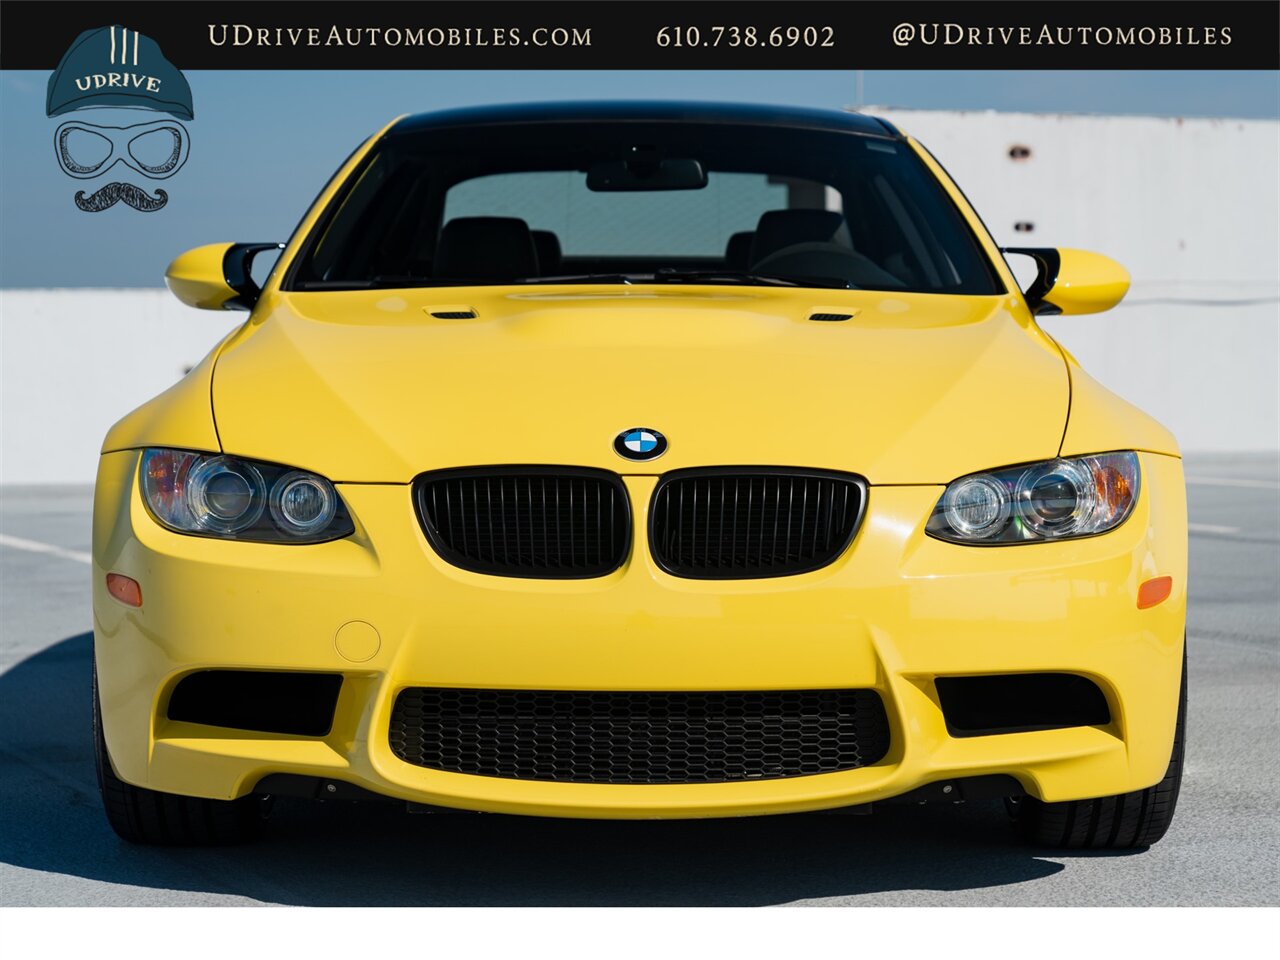 2010 BMW M3  E92 6 Sp Individual Dakar Cloth Seats Carbon Roof No NAV Rod Bearings Replaced - Photo 14 - West Chester, PA 19382